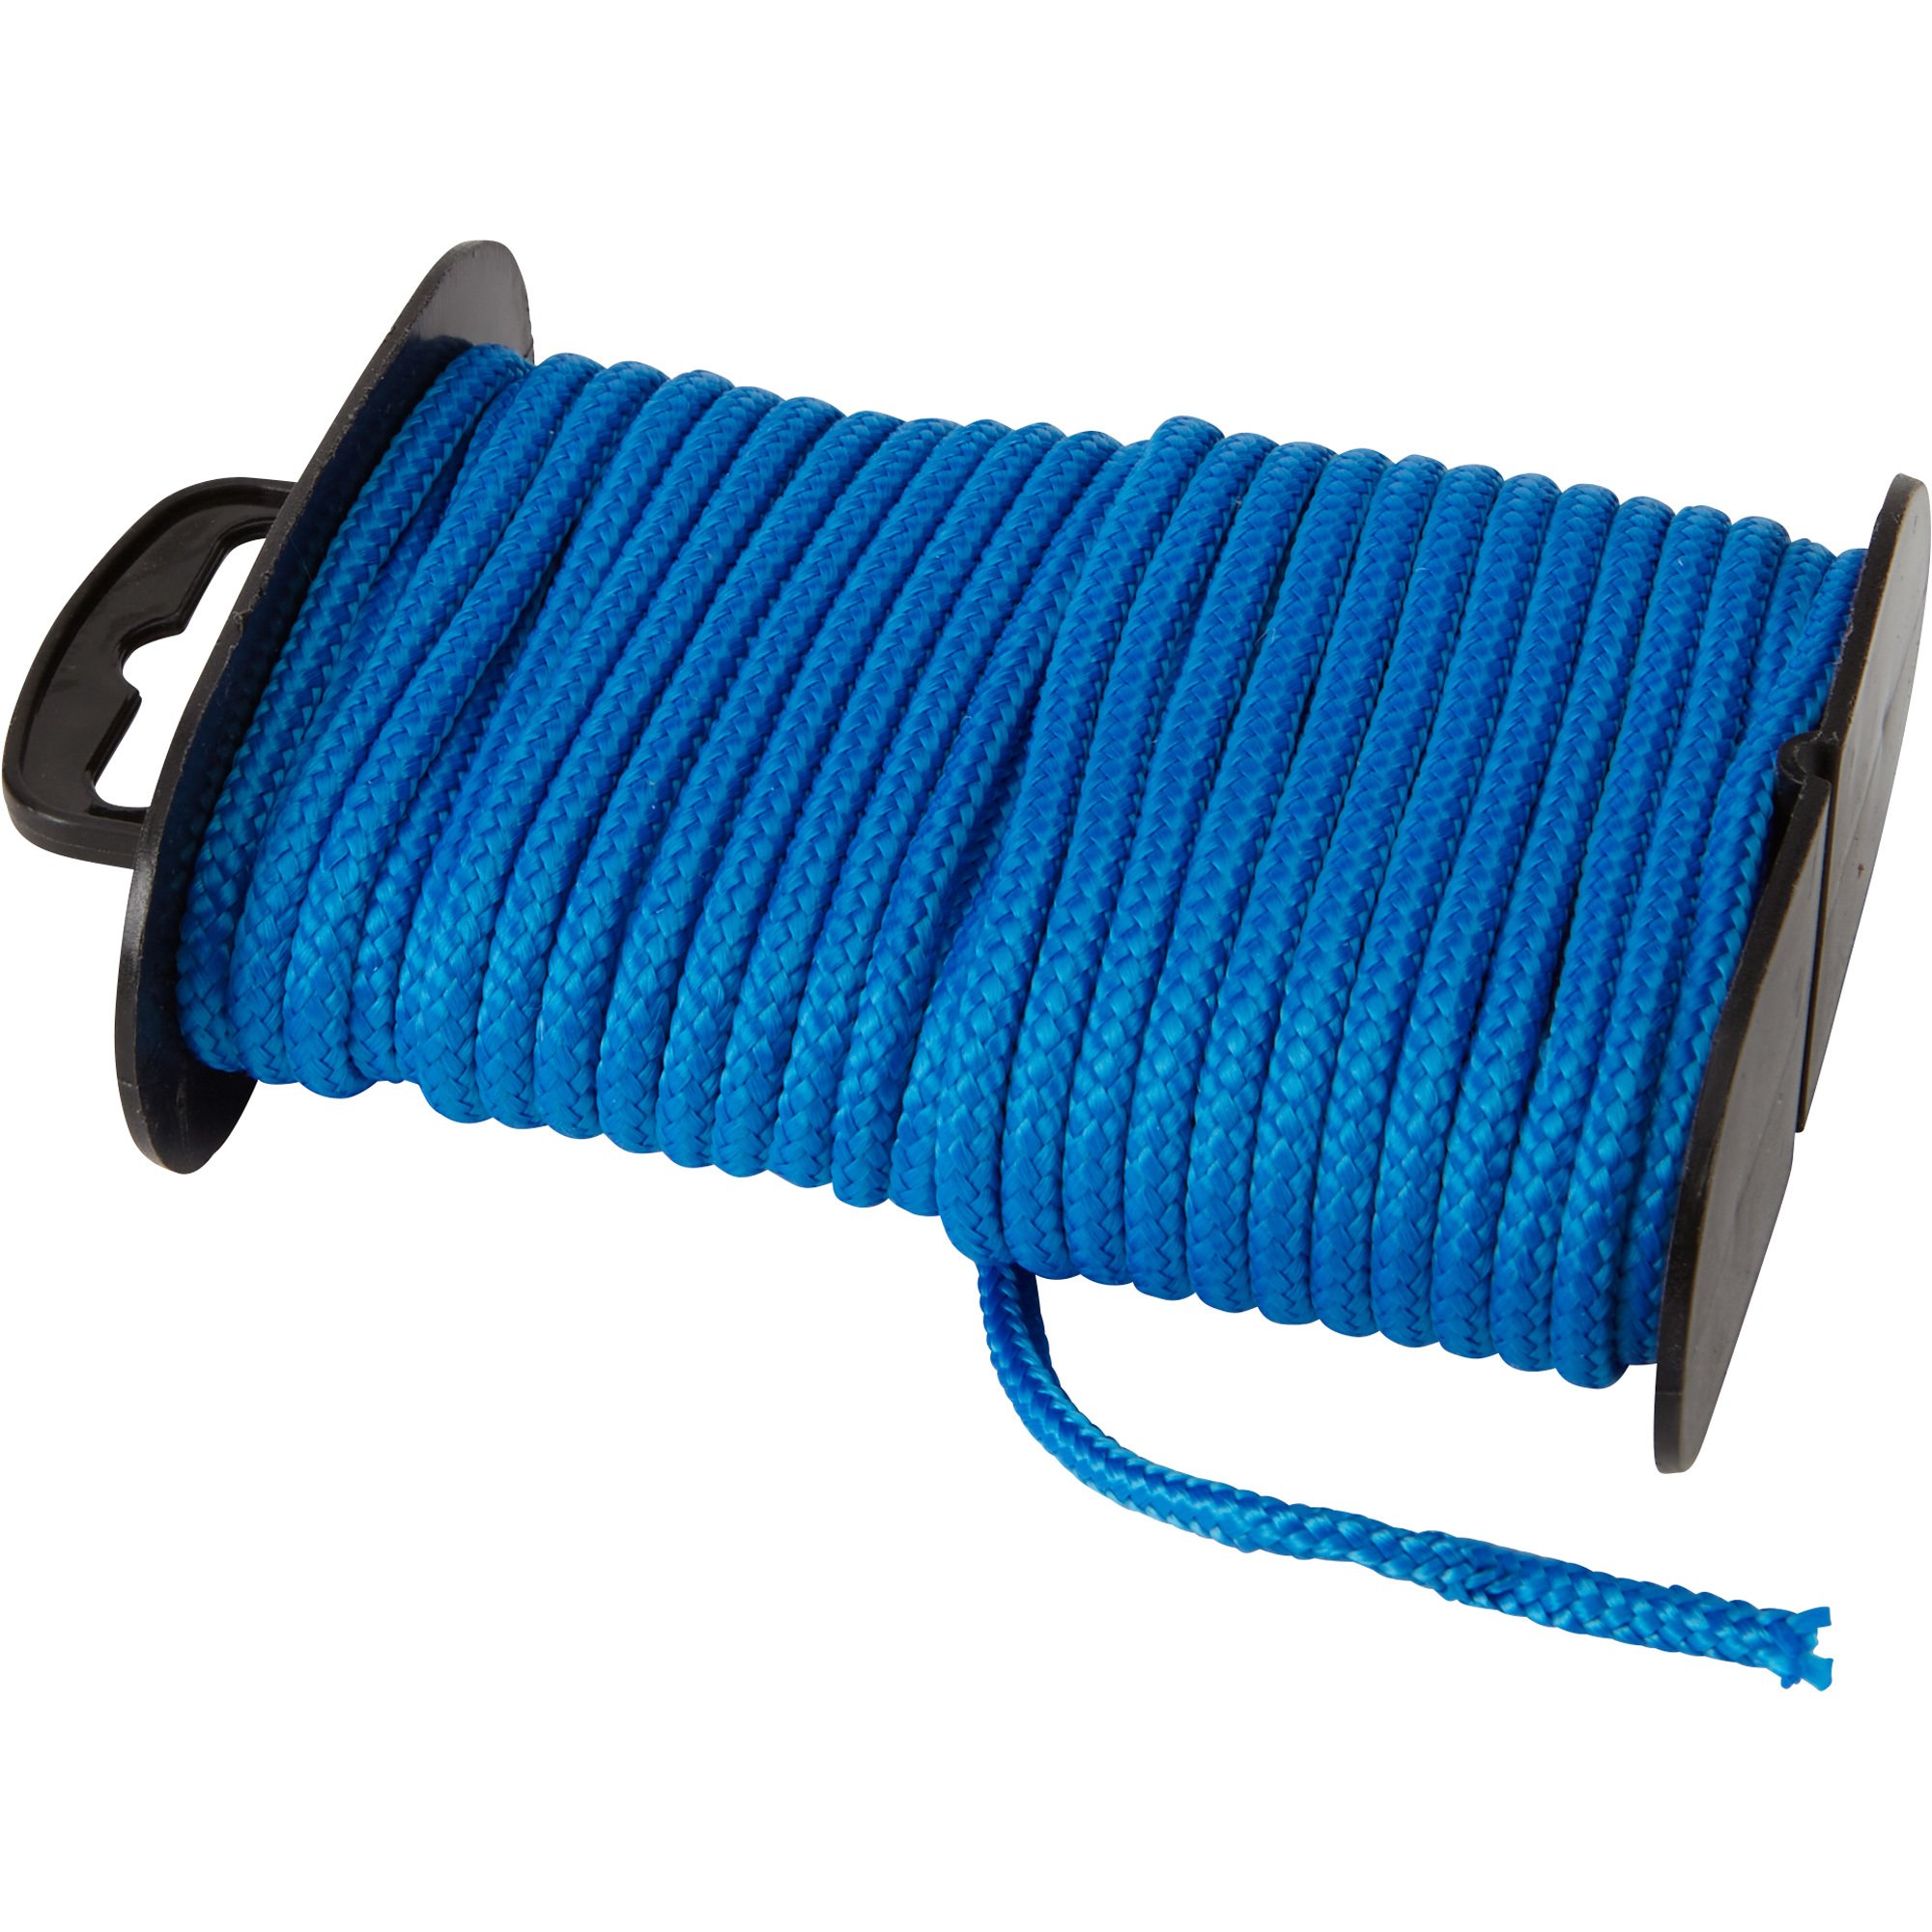 5/32in. x 38ft.L Polypropylene and Mixed Synthetic Diamond Braided Rope,  Bright Blue, Model# 42653238